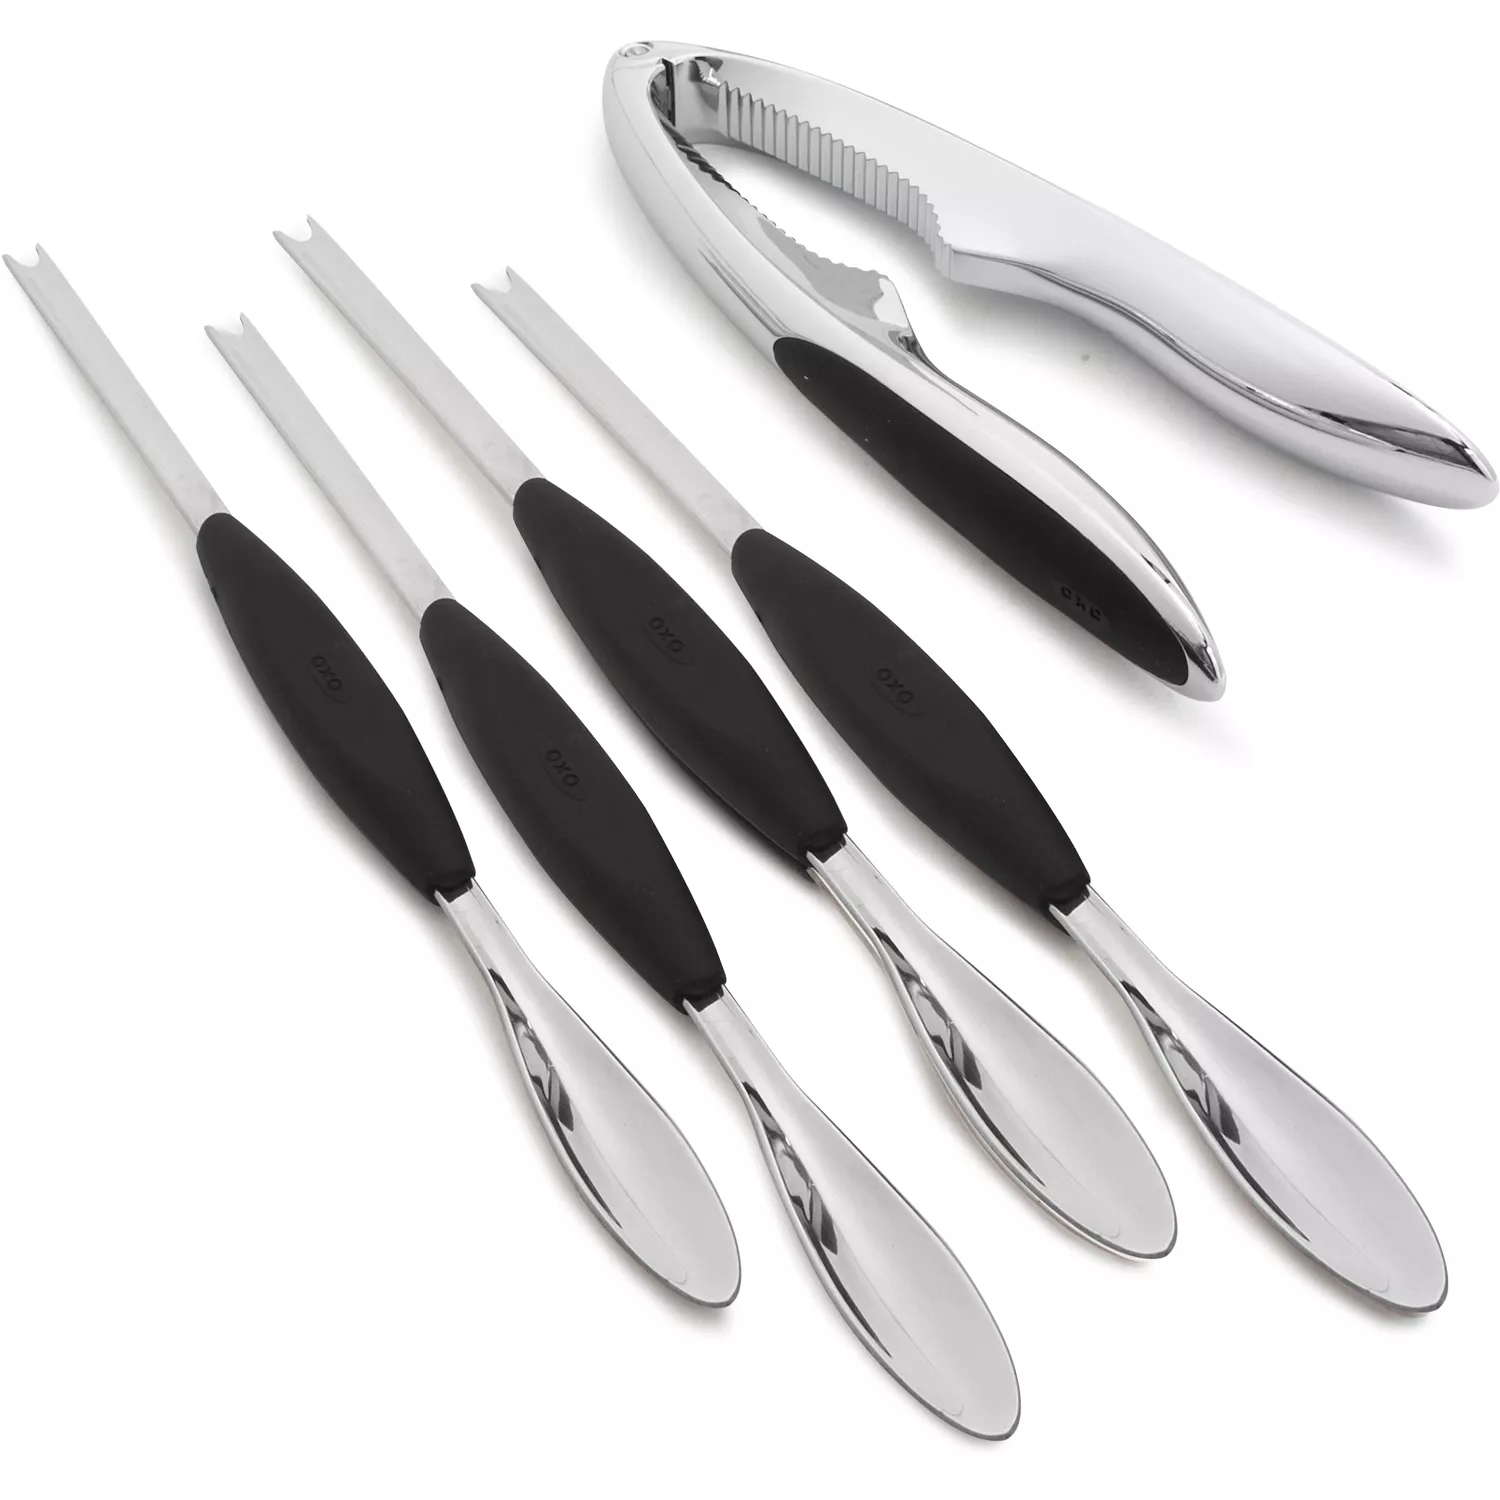 OXO Seafood Tools Collection